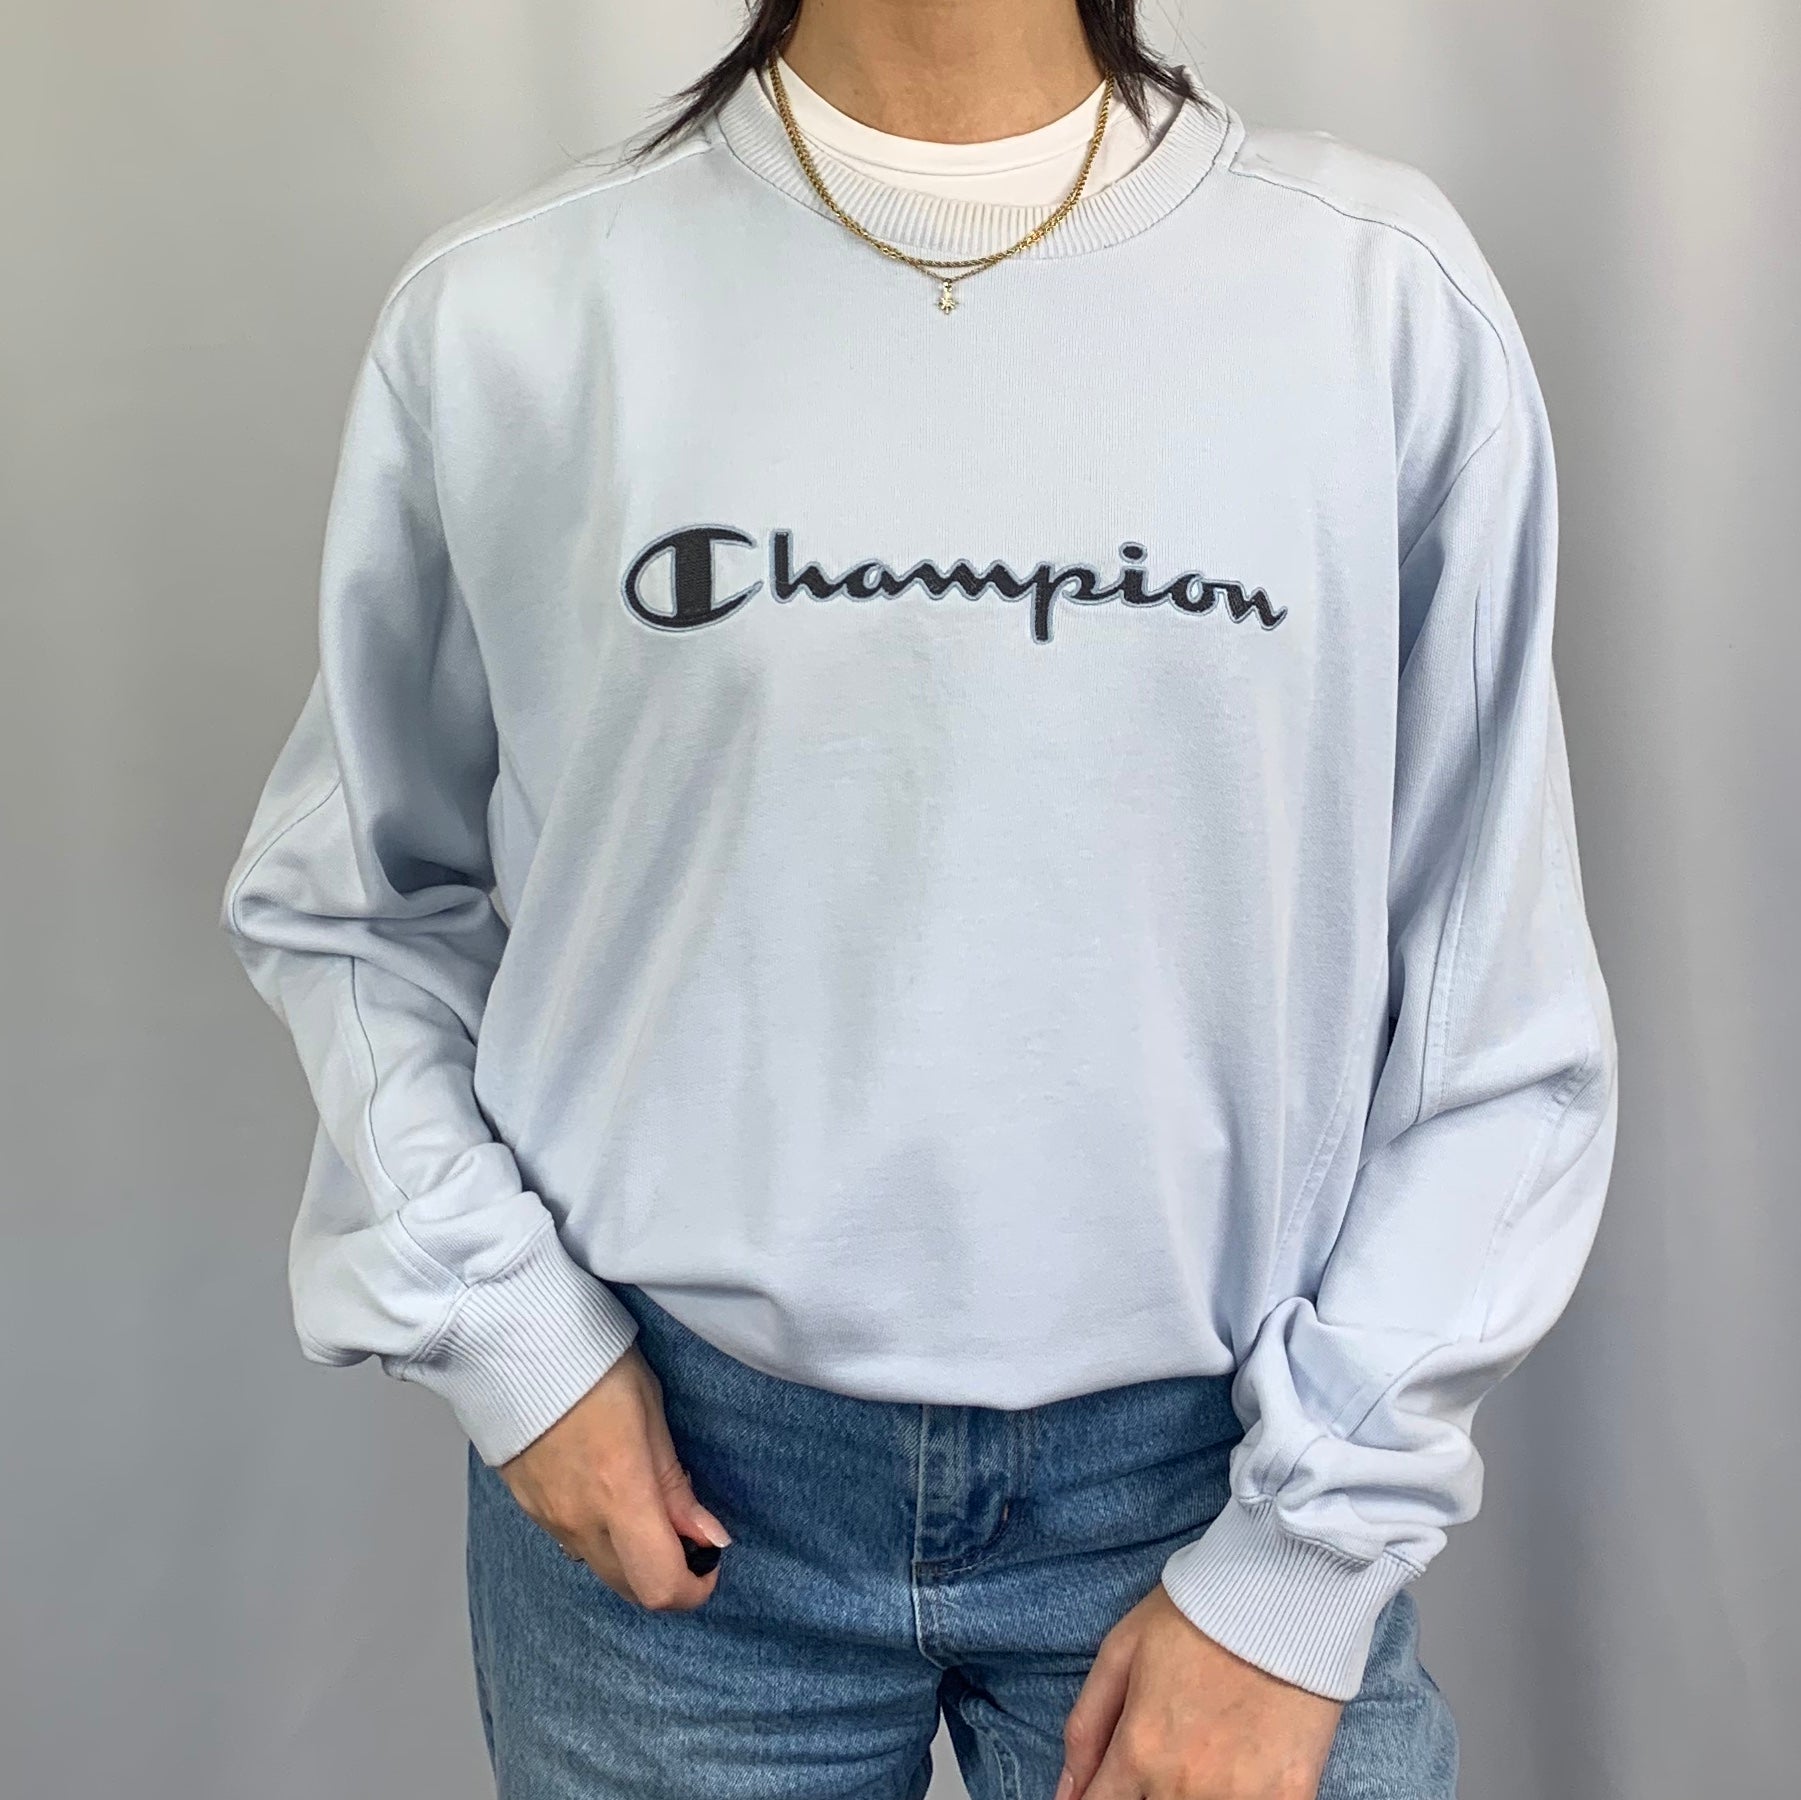 VINTAGE CHAMPION SWEATSHIRT WITH BIG EMBROIDERED SPELLOUT - Women's XL/ Men's M/L